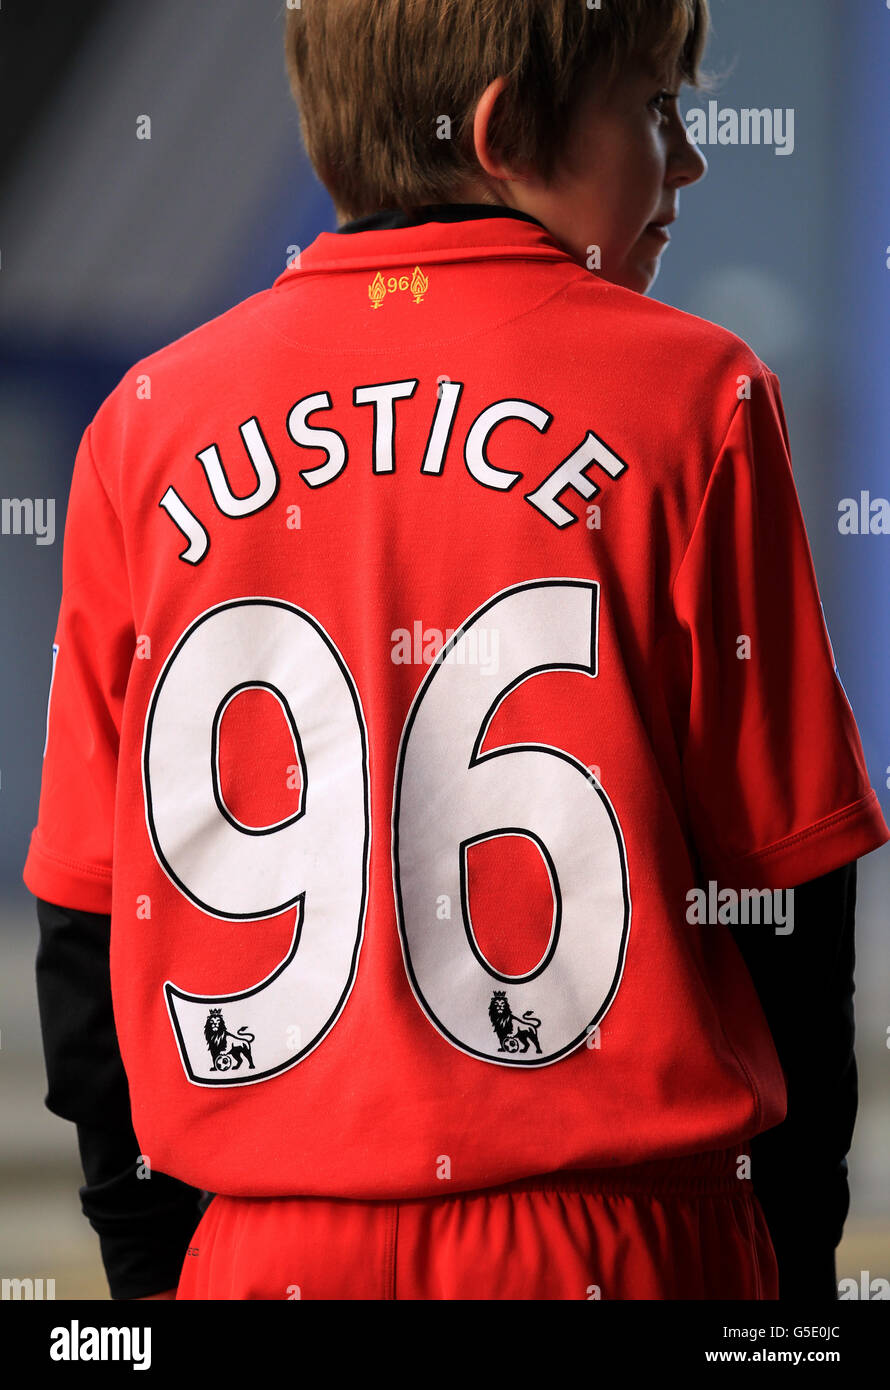 A young Liverpool fan with Justice 96 on the back of his shirt Stock Photo  - Alamy